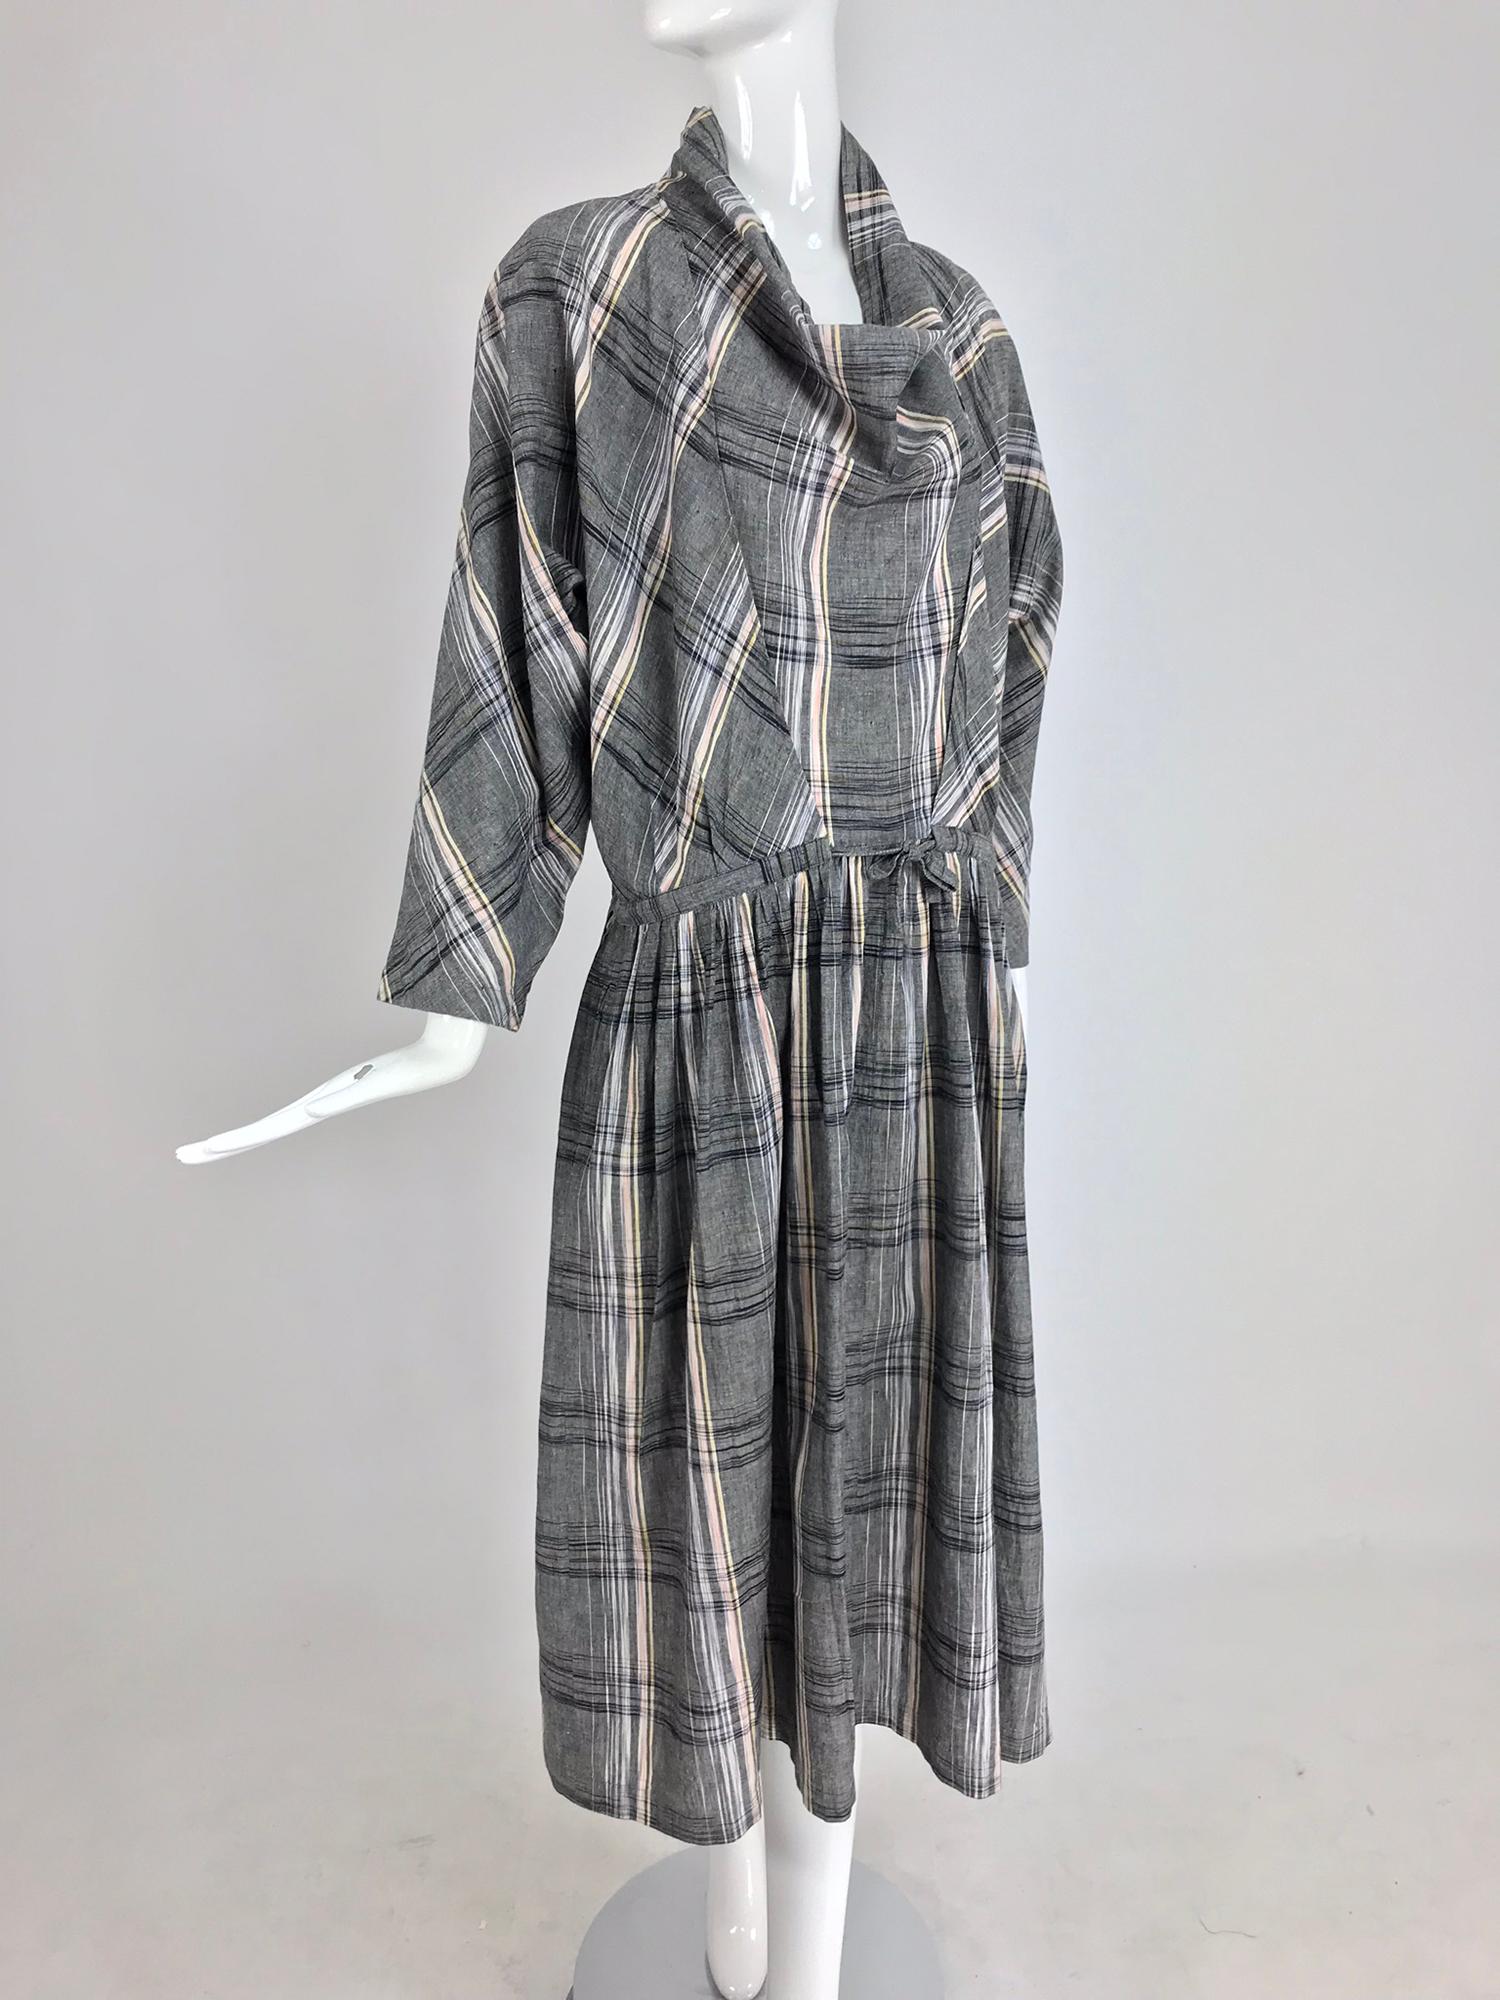 Issey Miyake Funnel Neck Plaid cotton Draw Cord waist dress from the 1980s. Chambray cotton plaid oversize dress has a funnel neck, with 3/4 length full sleeves, low draw cord waist and full skirt. The dress pulls on and is unlined. Marked size